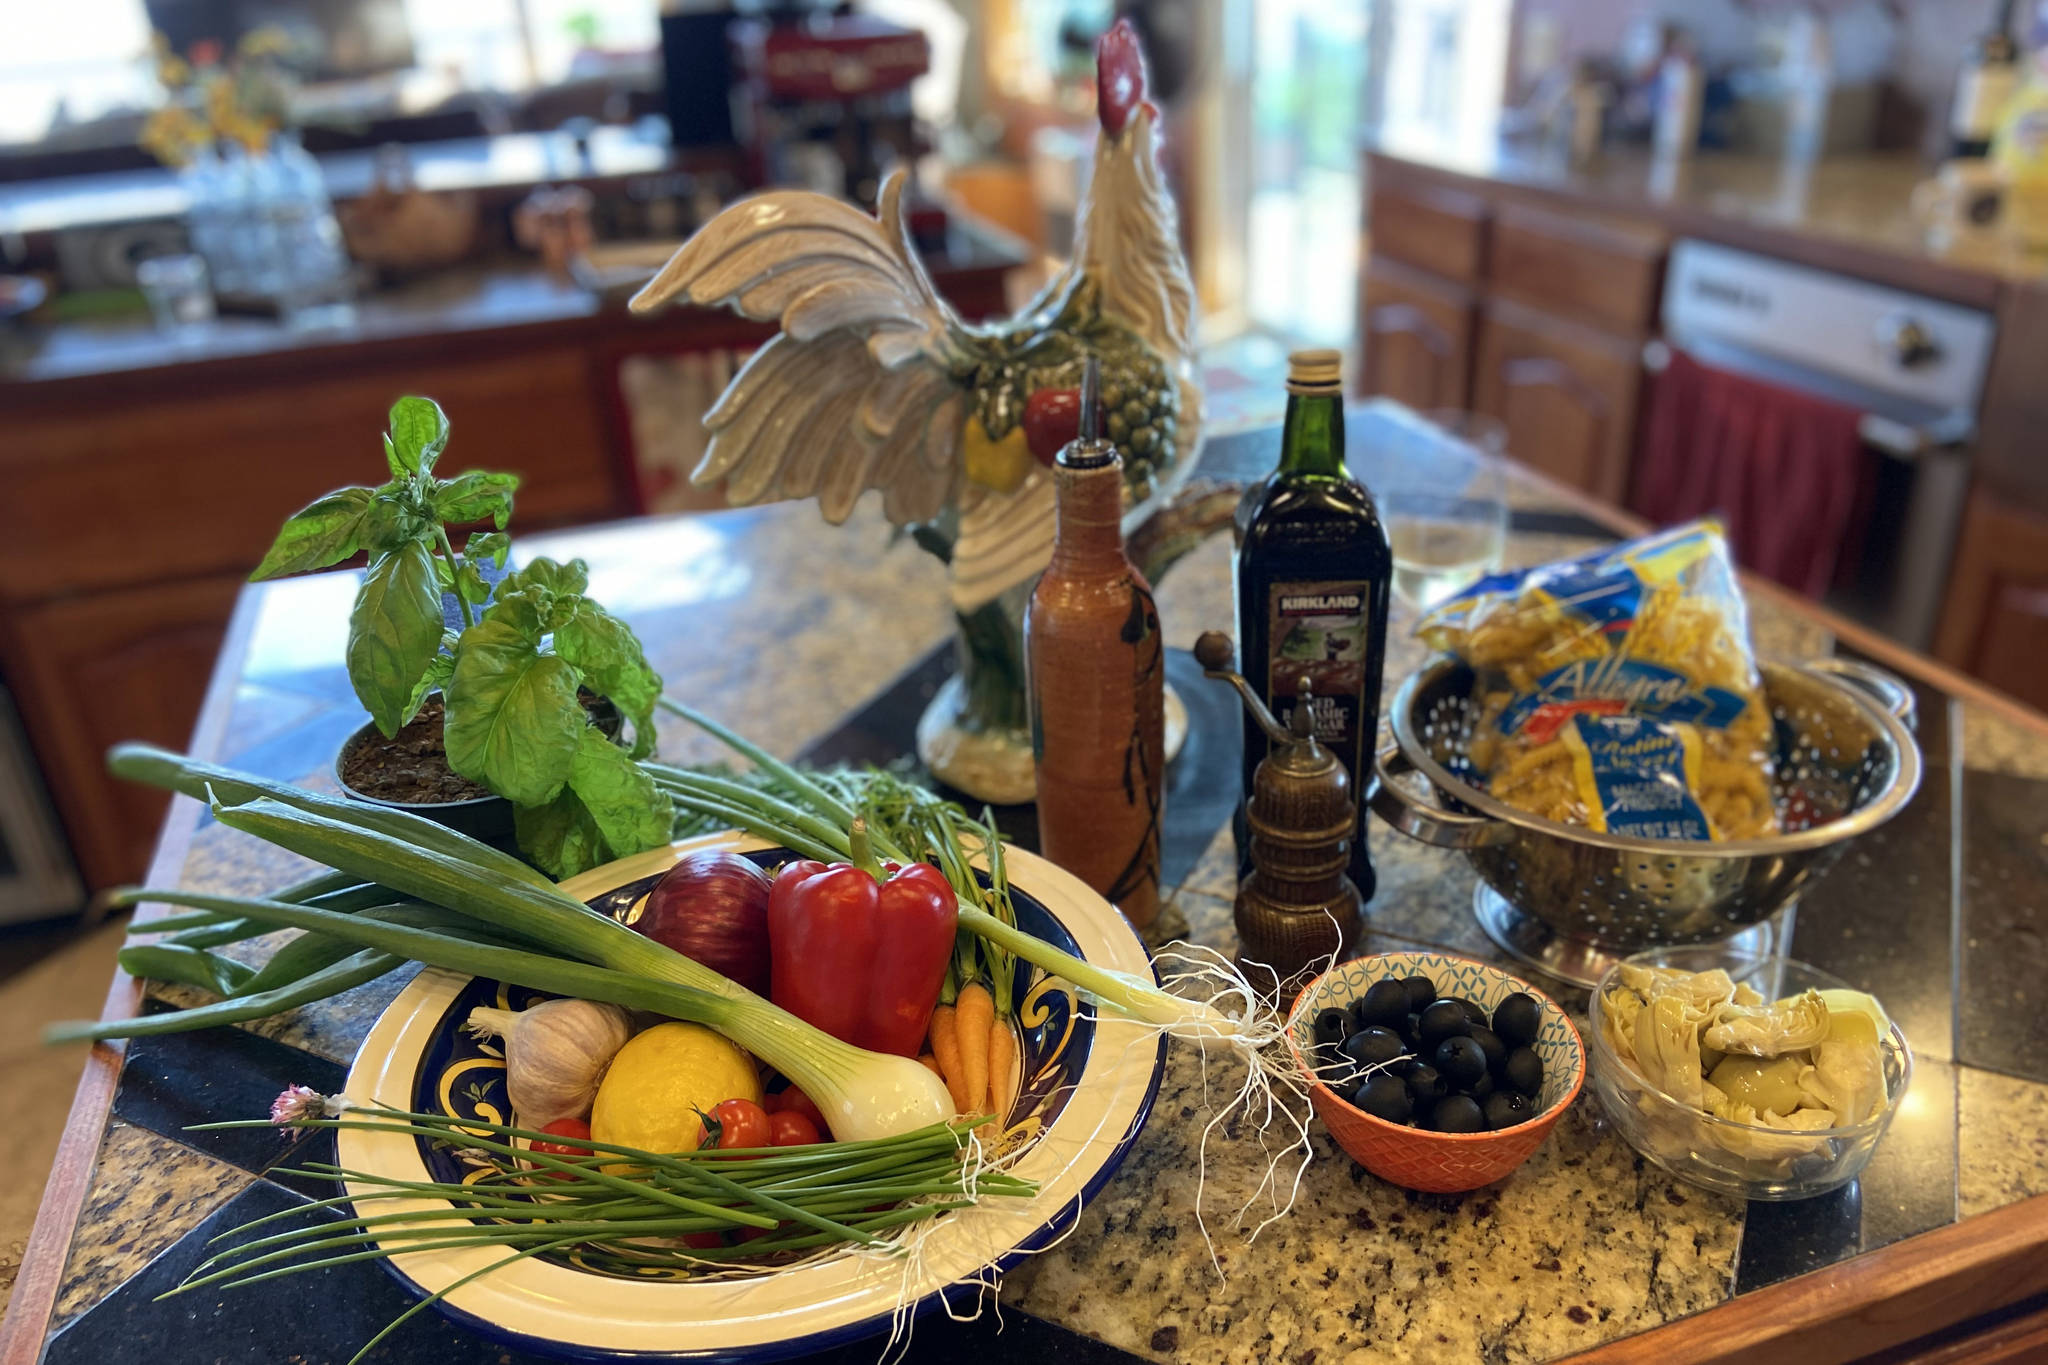 Ingredients for Farmers Market Pasta Salad are photographed in Homer, Alaska, in July 2020. (Photo by Teri Robl/Homer News)